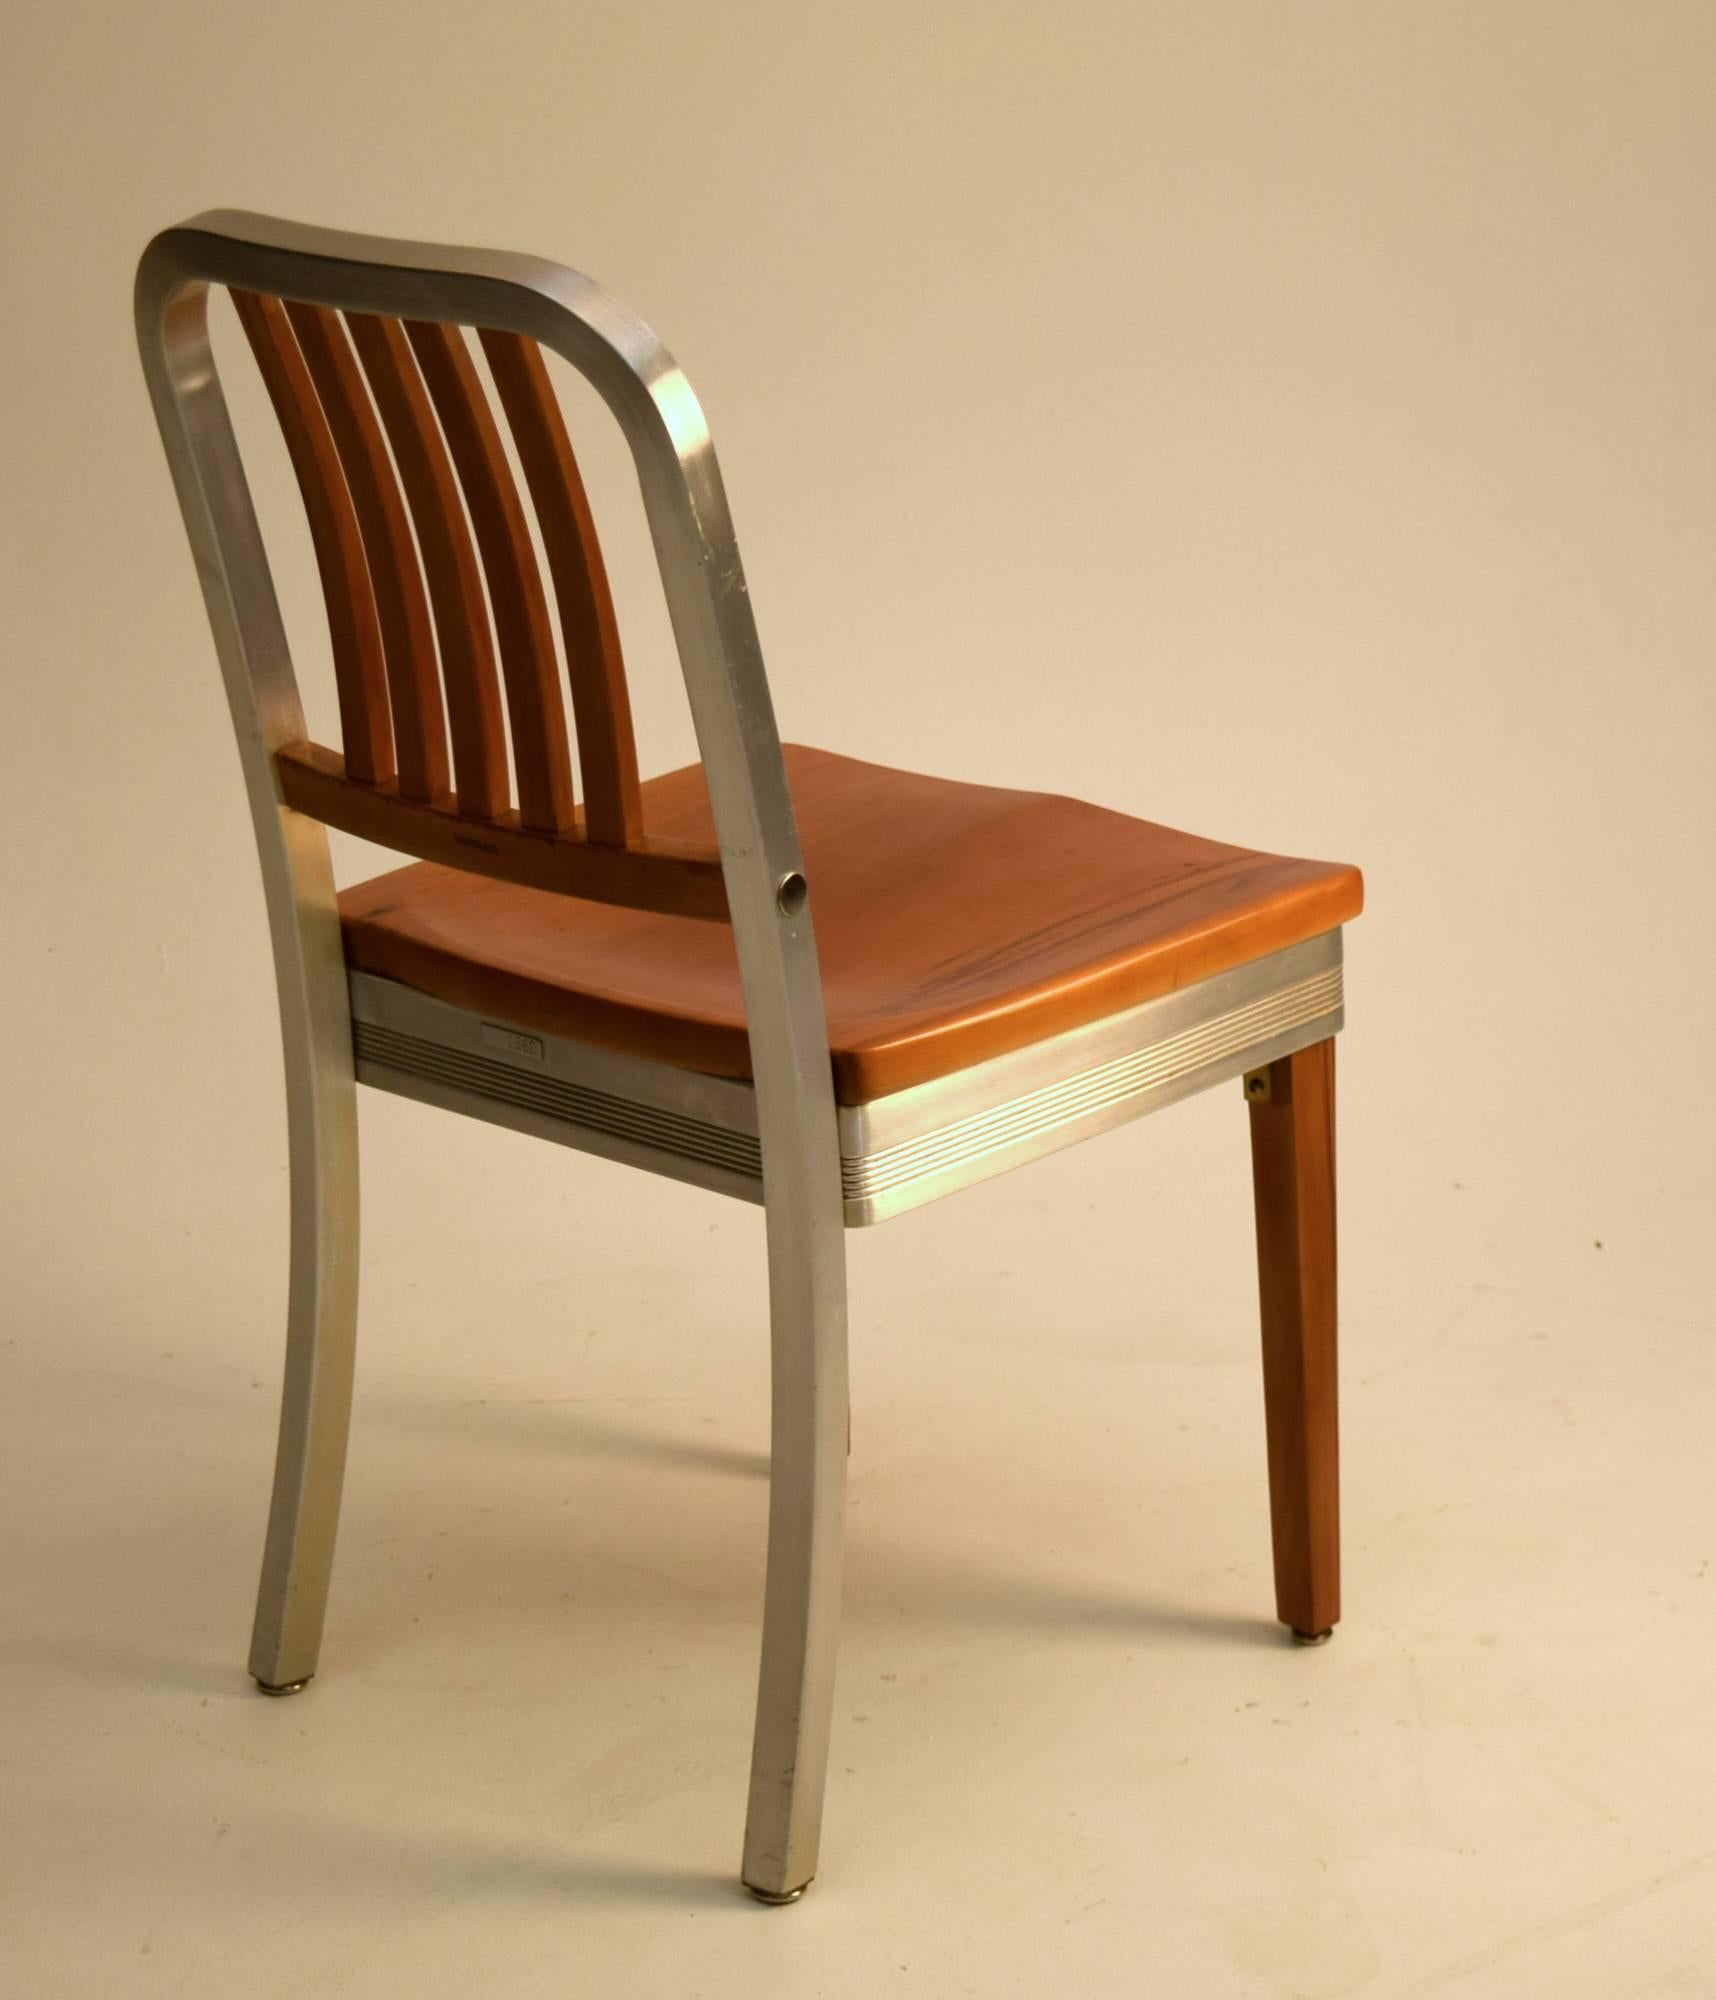 Bold and unlike any others produced, Shaw Walker amalgamated Aluminium and maple together to produce a chair design that stands still totally as unique.

Measures: 32.5" tall, 17" wide and 19" deep with the seat height being